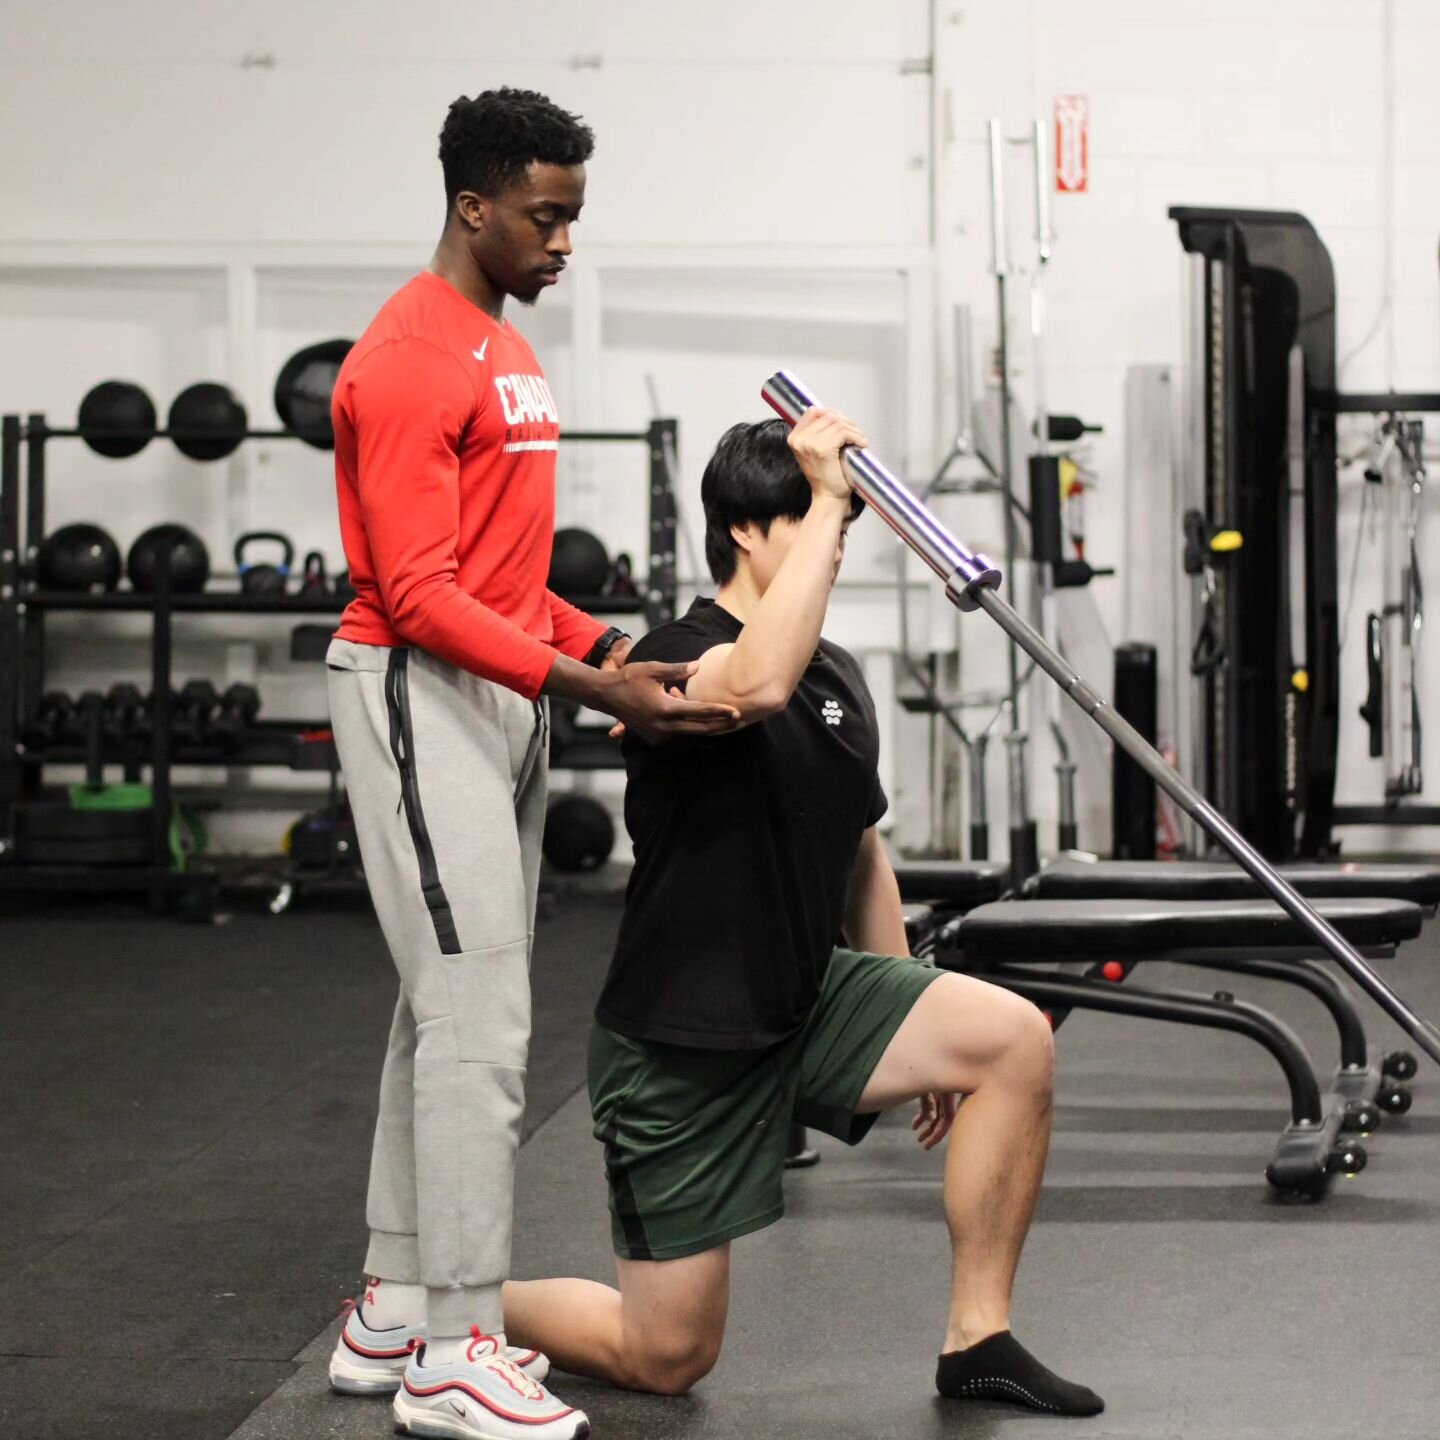 Looking to rehab from an injury?
Looking to increase your speed and explosiveness?
Looking to move better? 
Looking to recover from the grind? 
Looking to lose weight and get strong? 
I got you. Offering physiotherapy and training services in Mississ